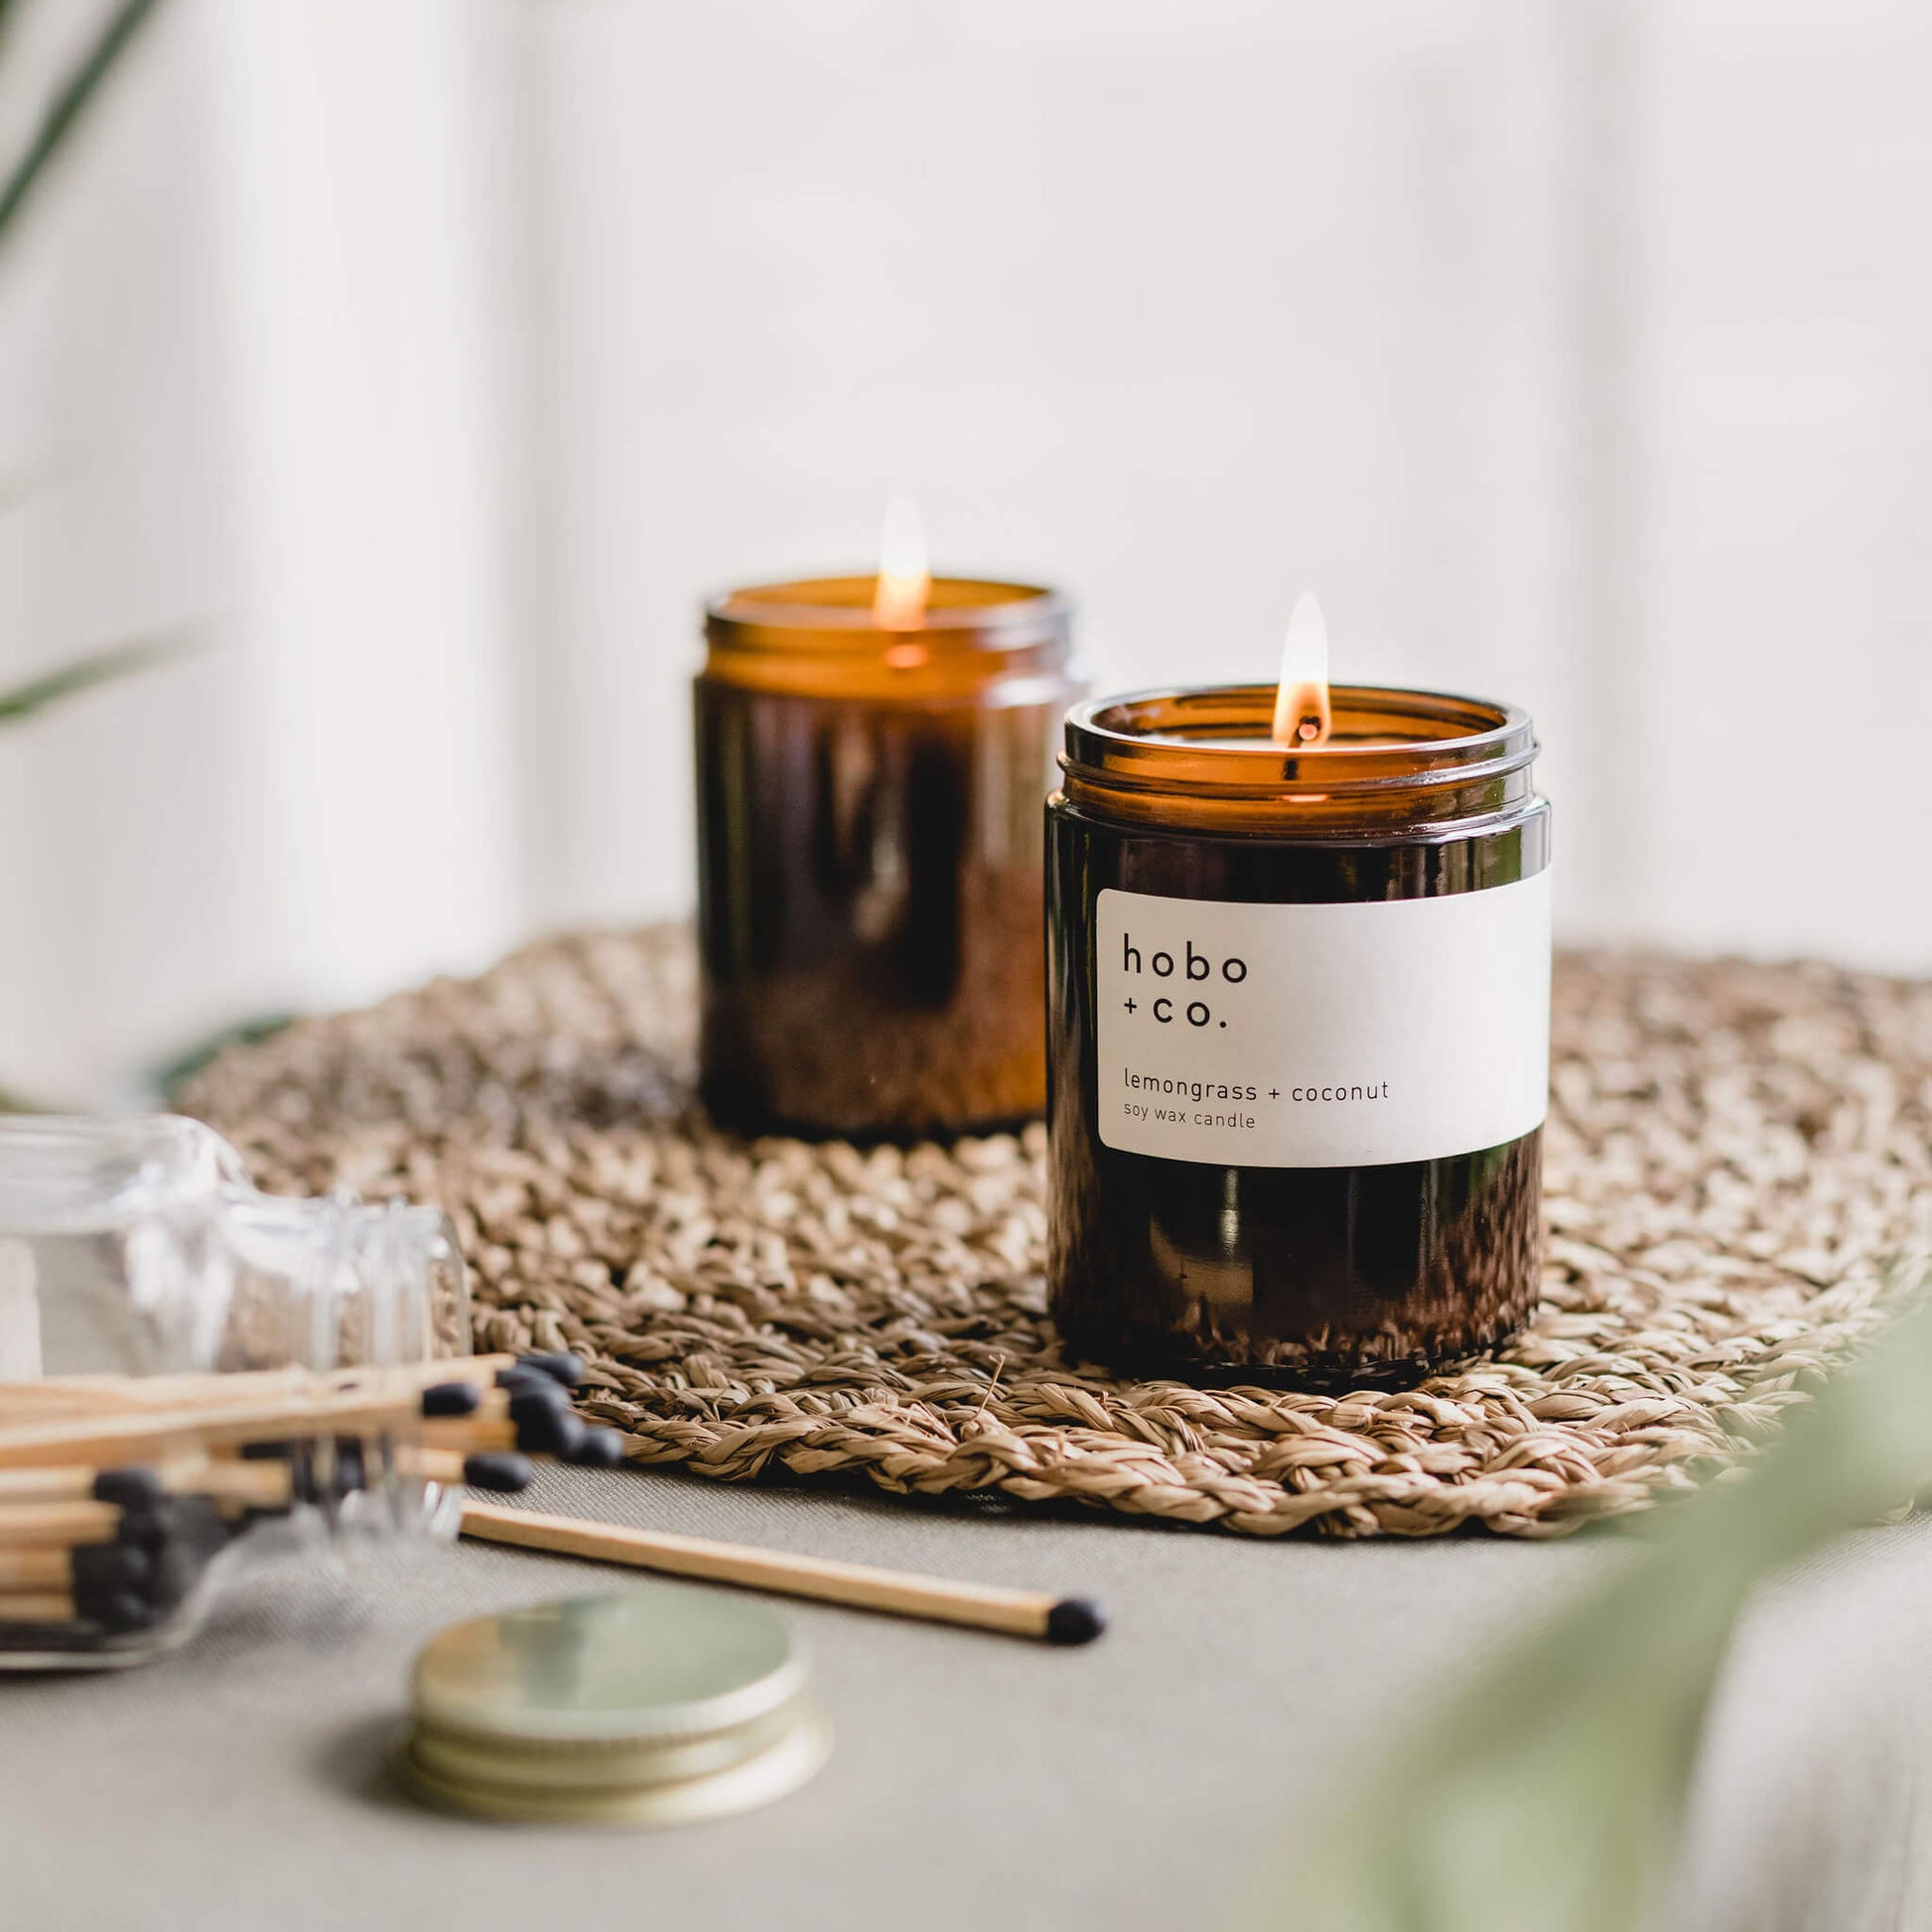 Hobo + Co. Lemongrass & Coconut Scented Candle - Osmology Scented Candles & Home Fragrance